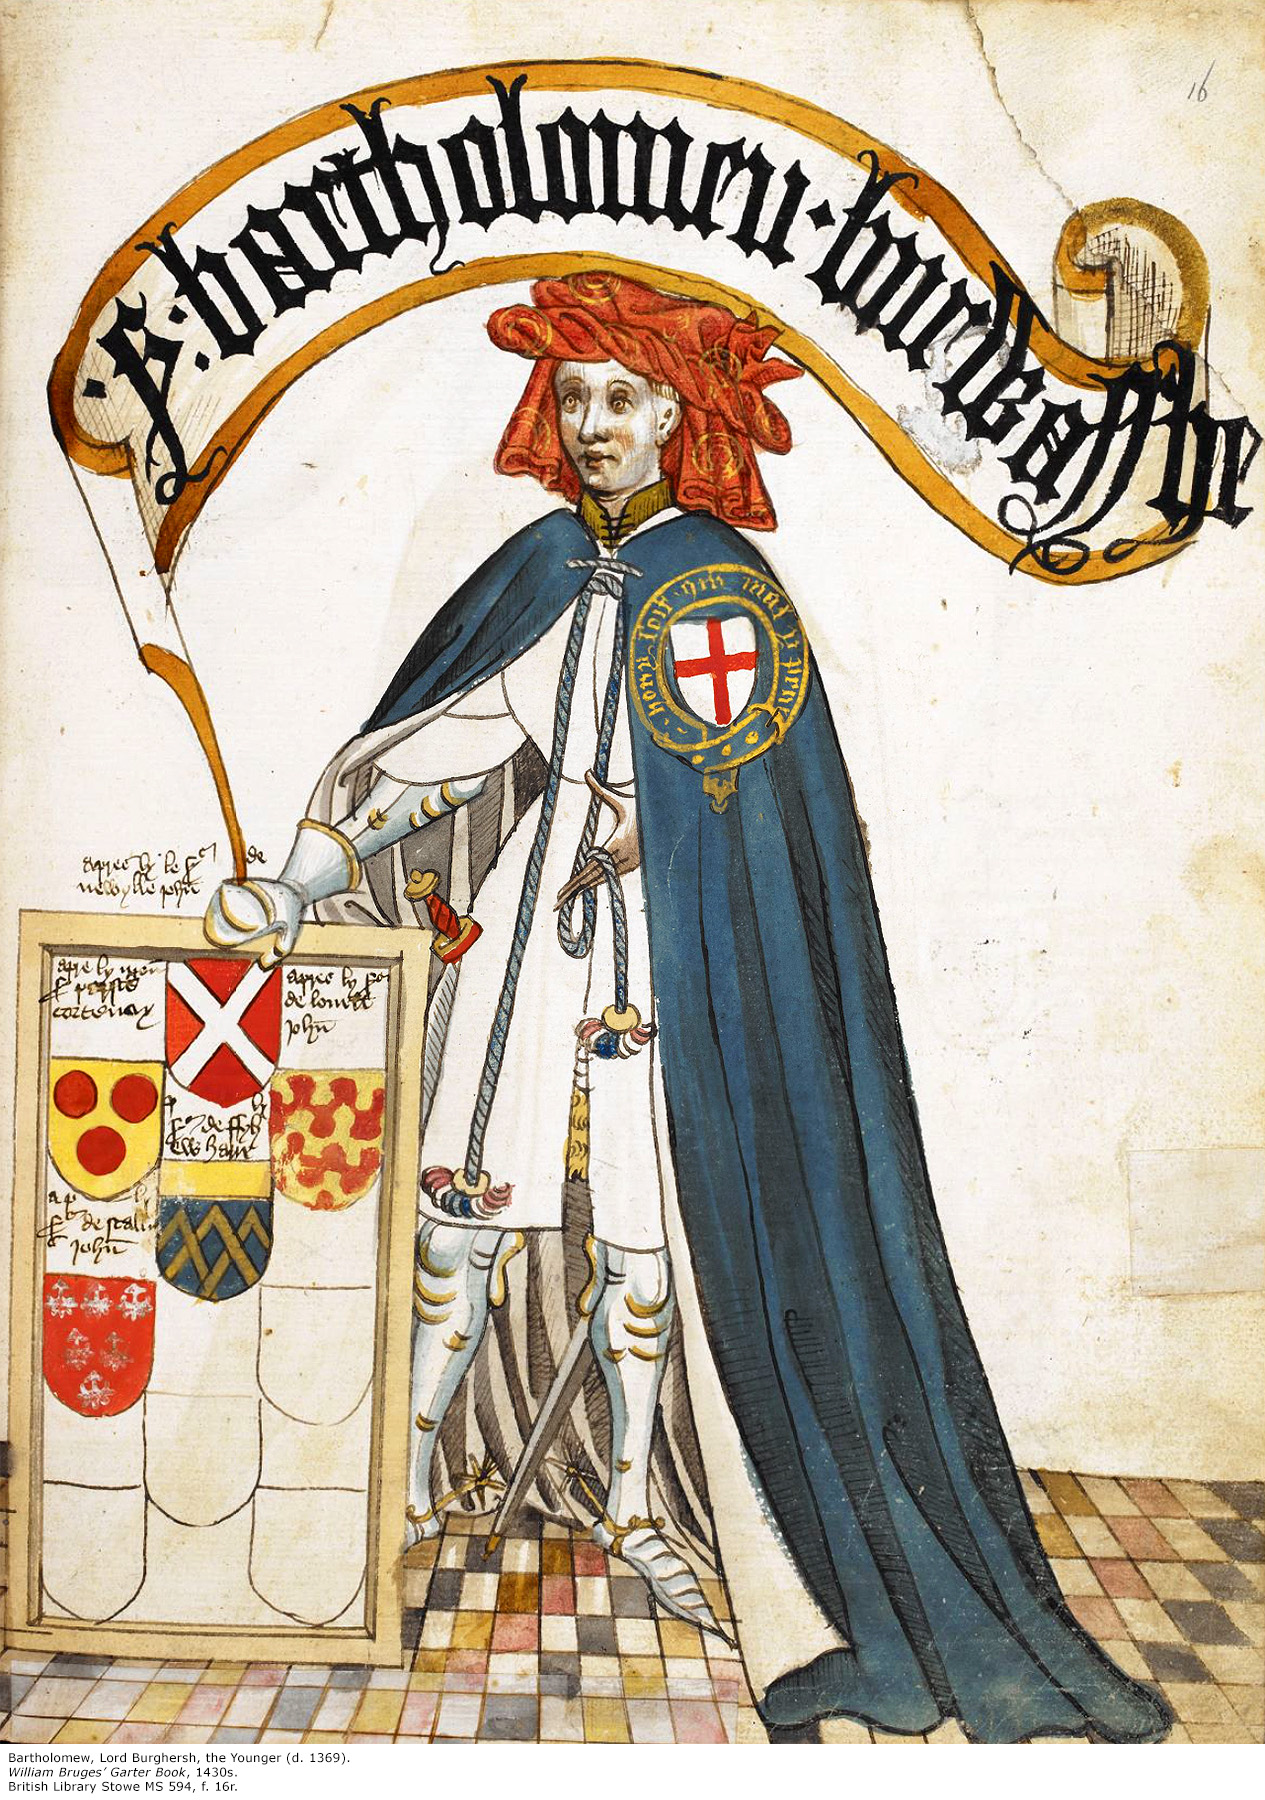 Bartholomew, Lord Burghersh, the Younger (d. 1369)